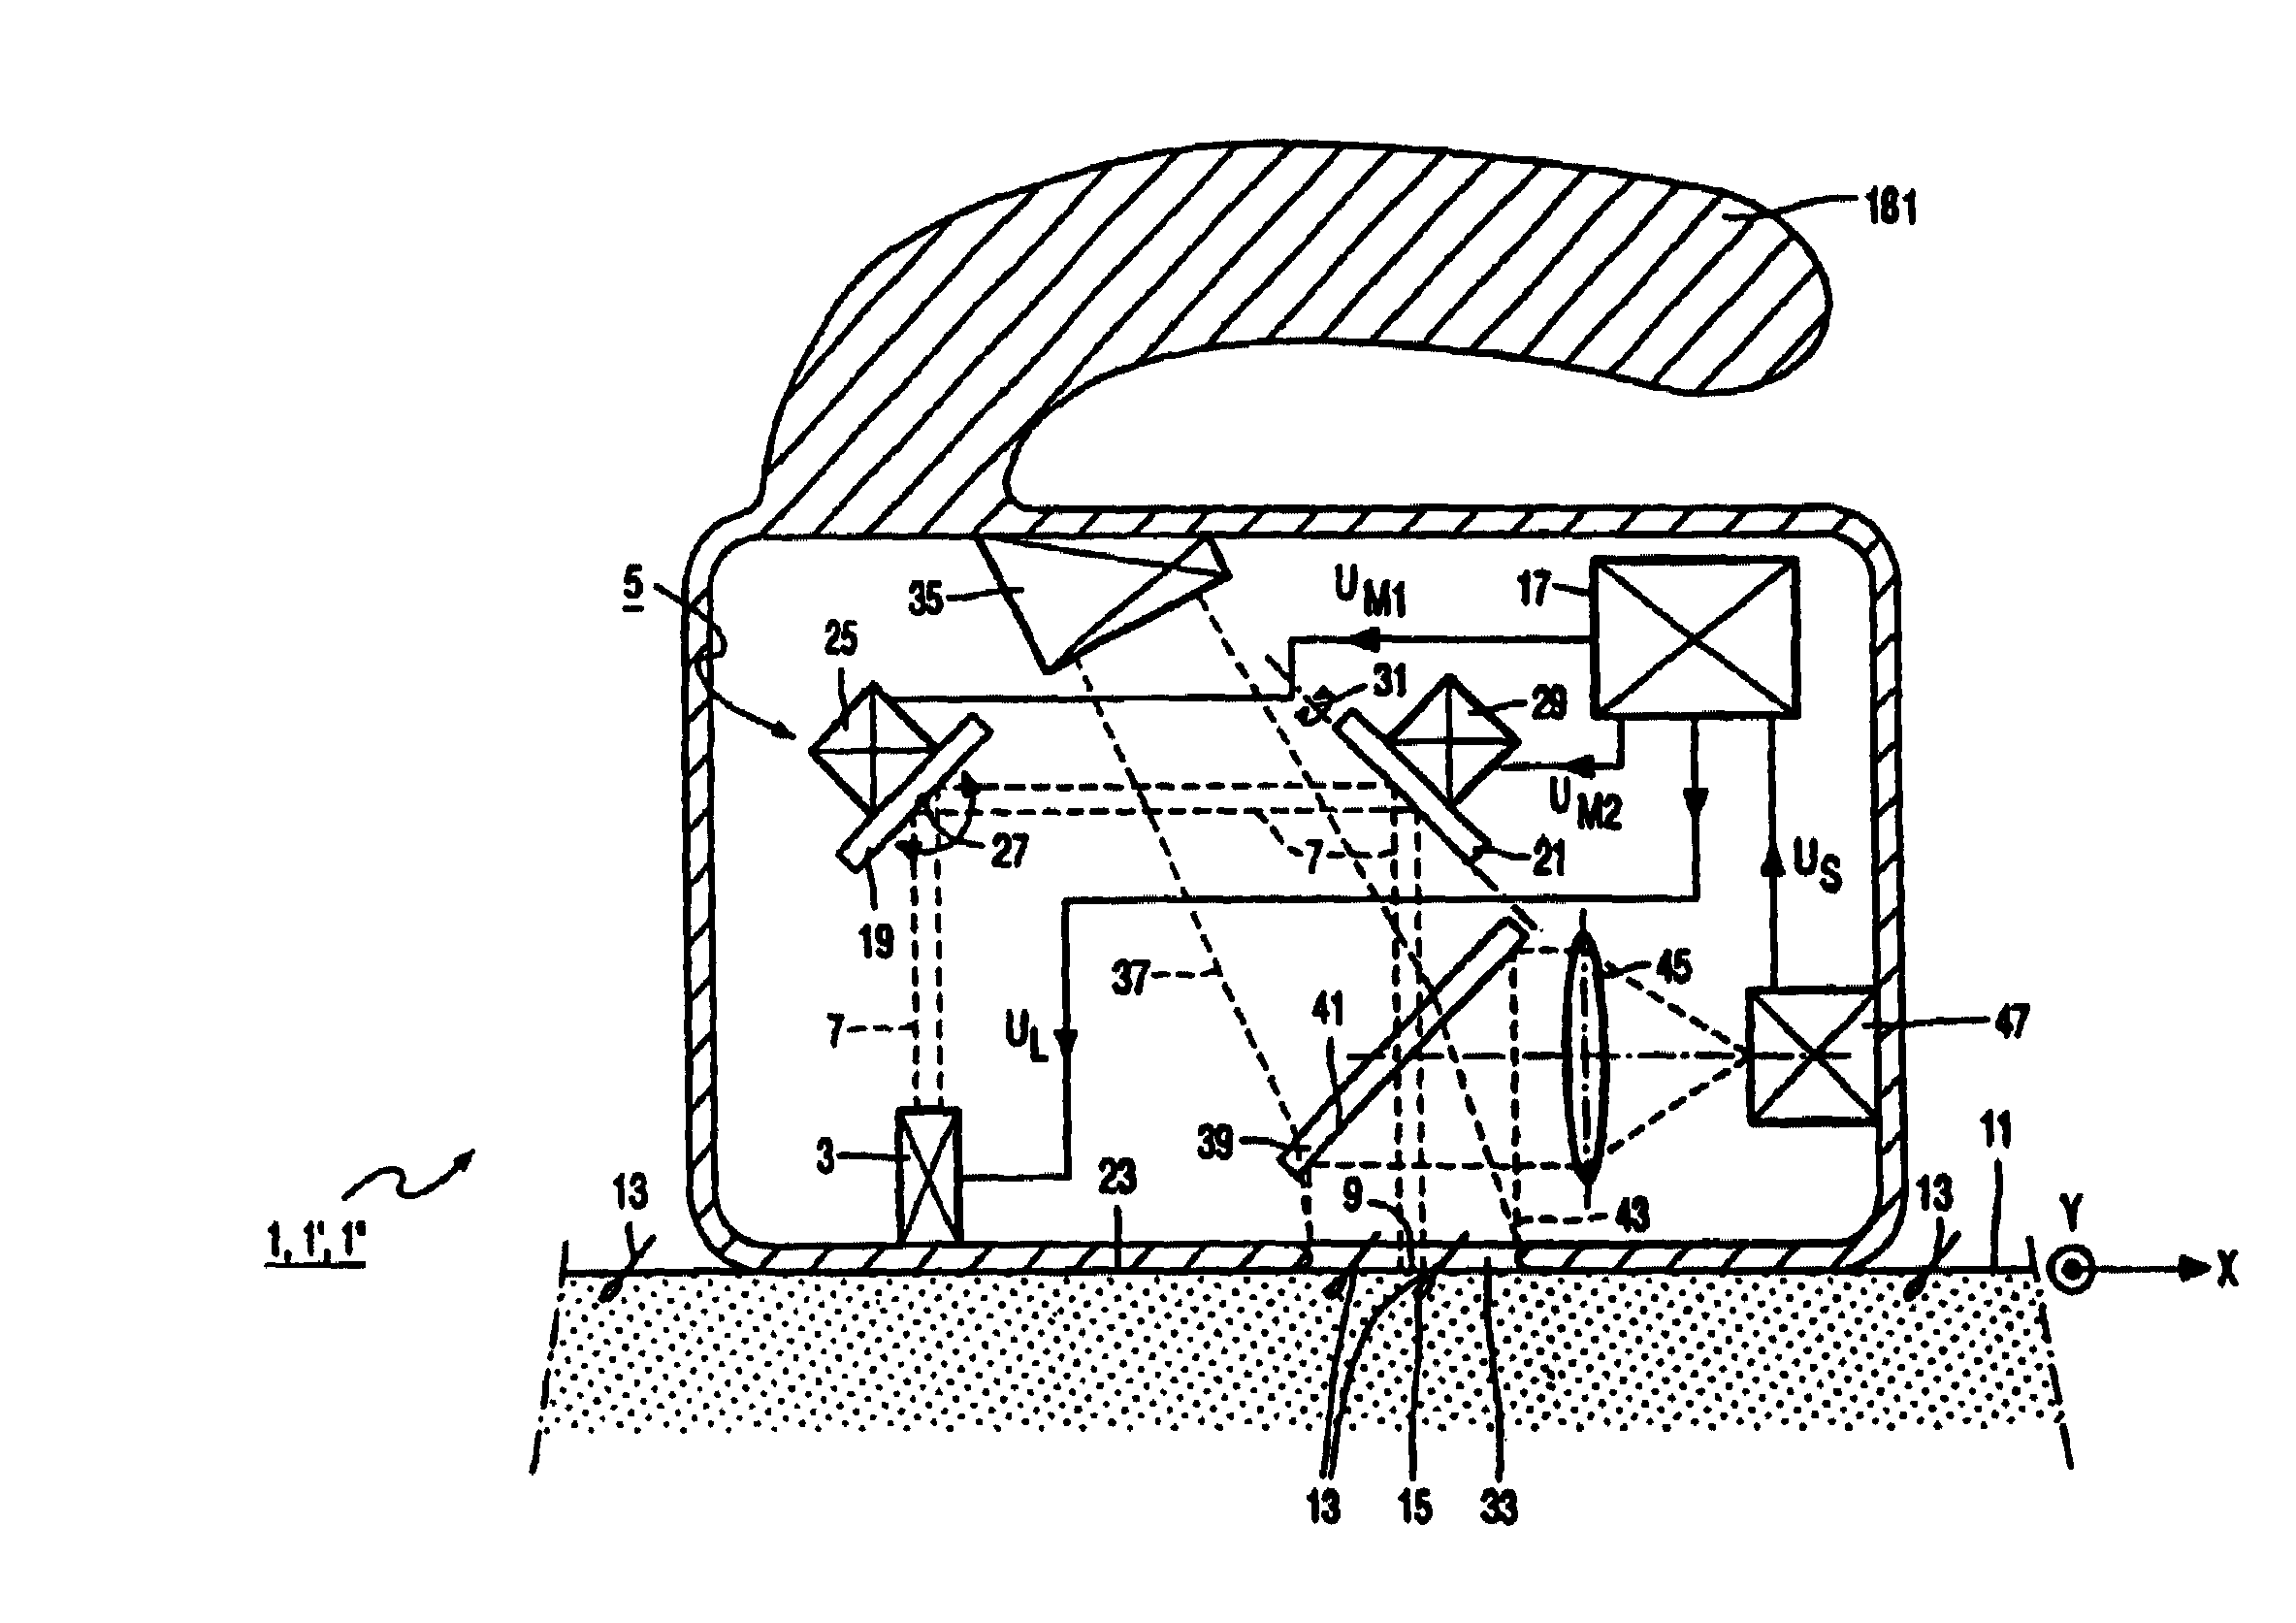 Hair-removing device with a controllable laser source